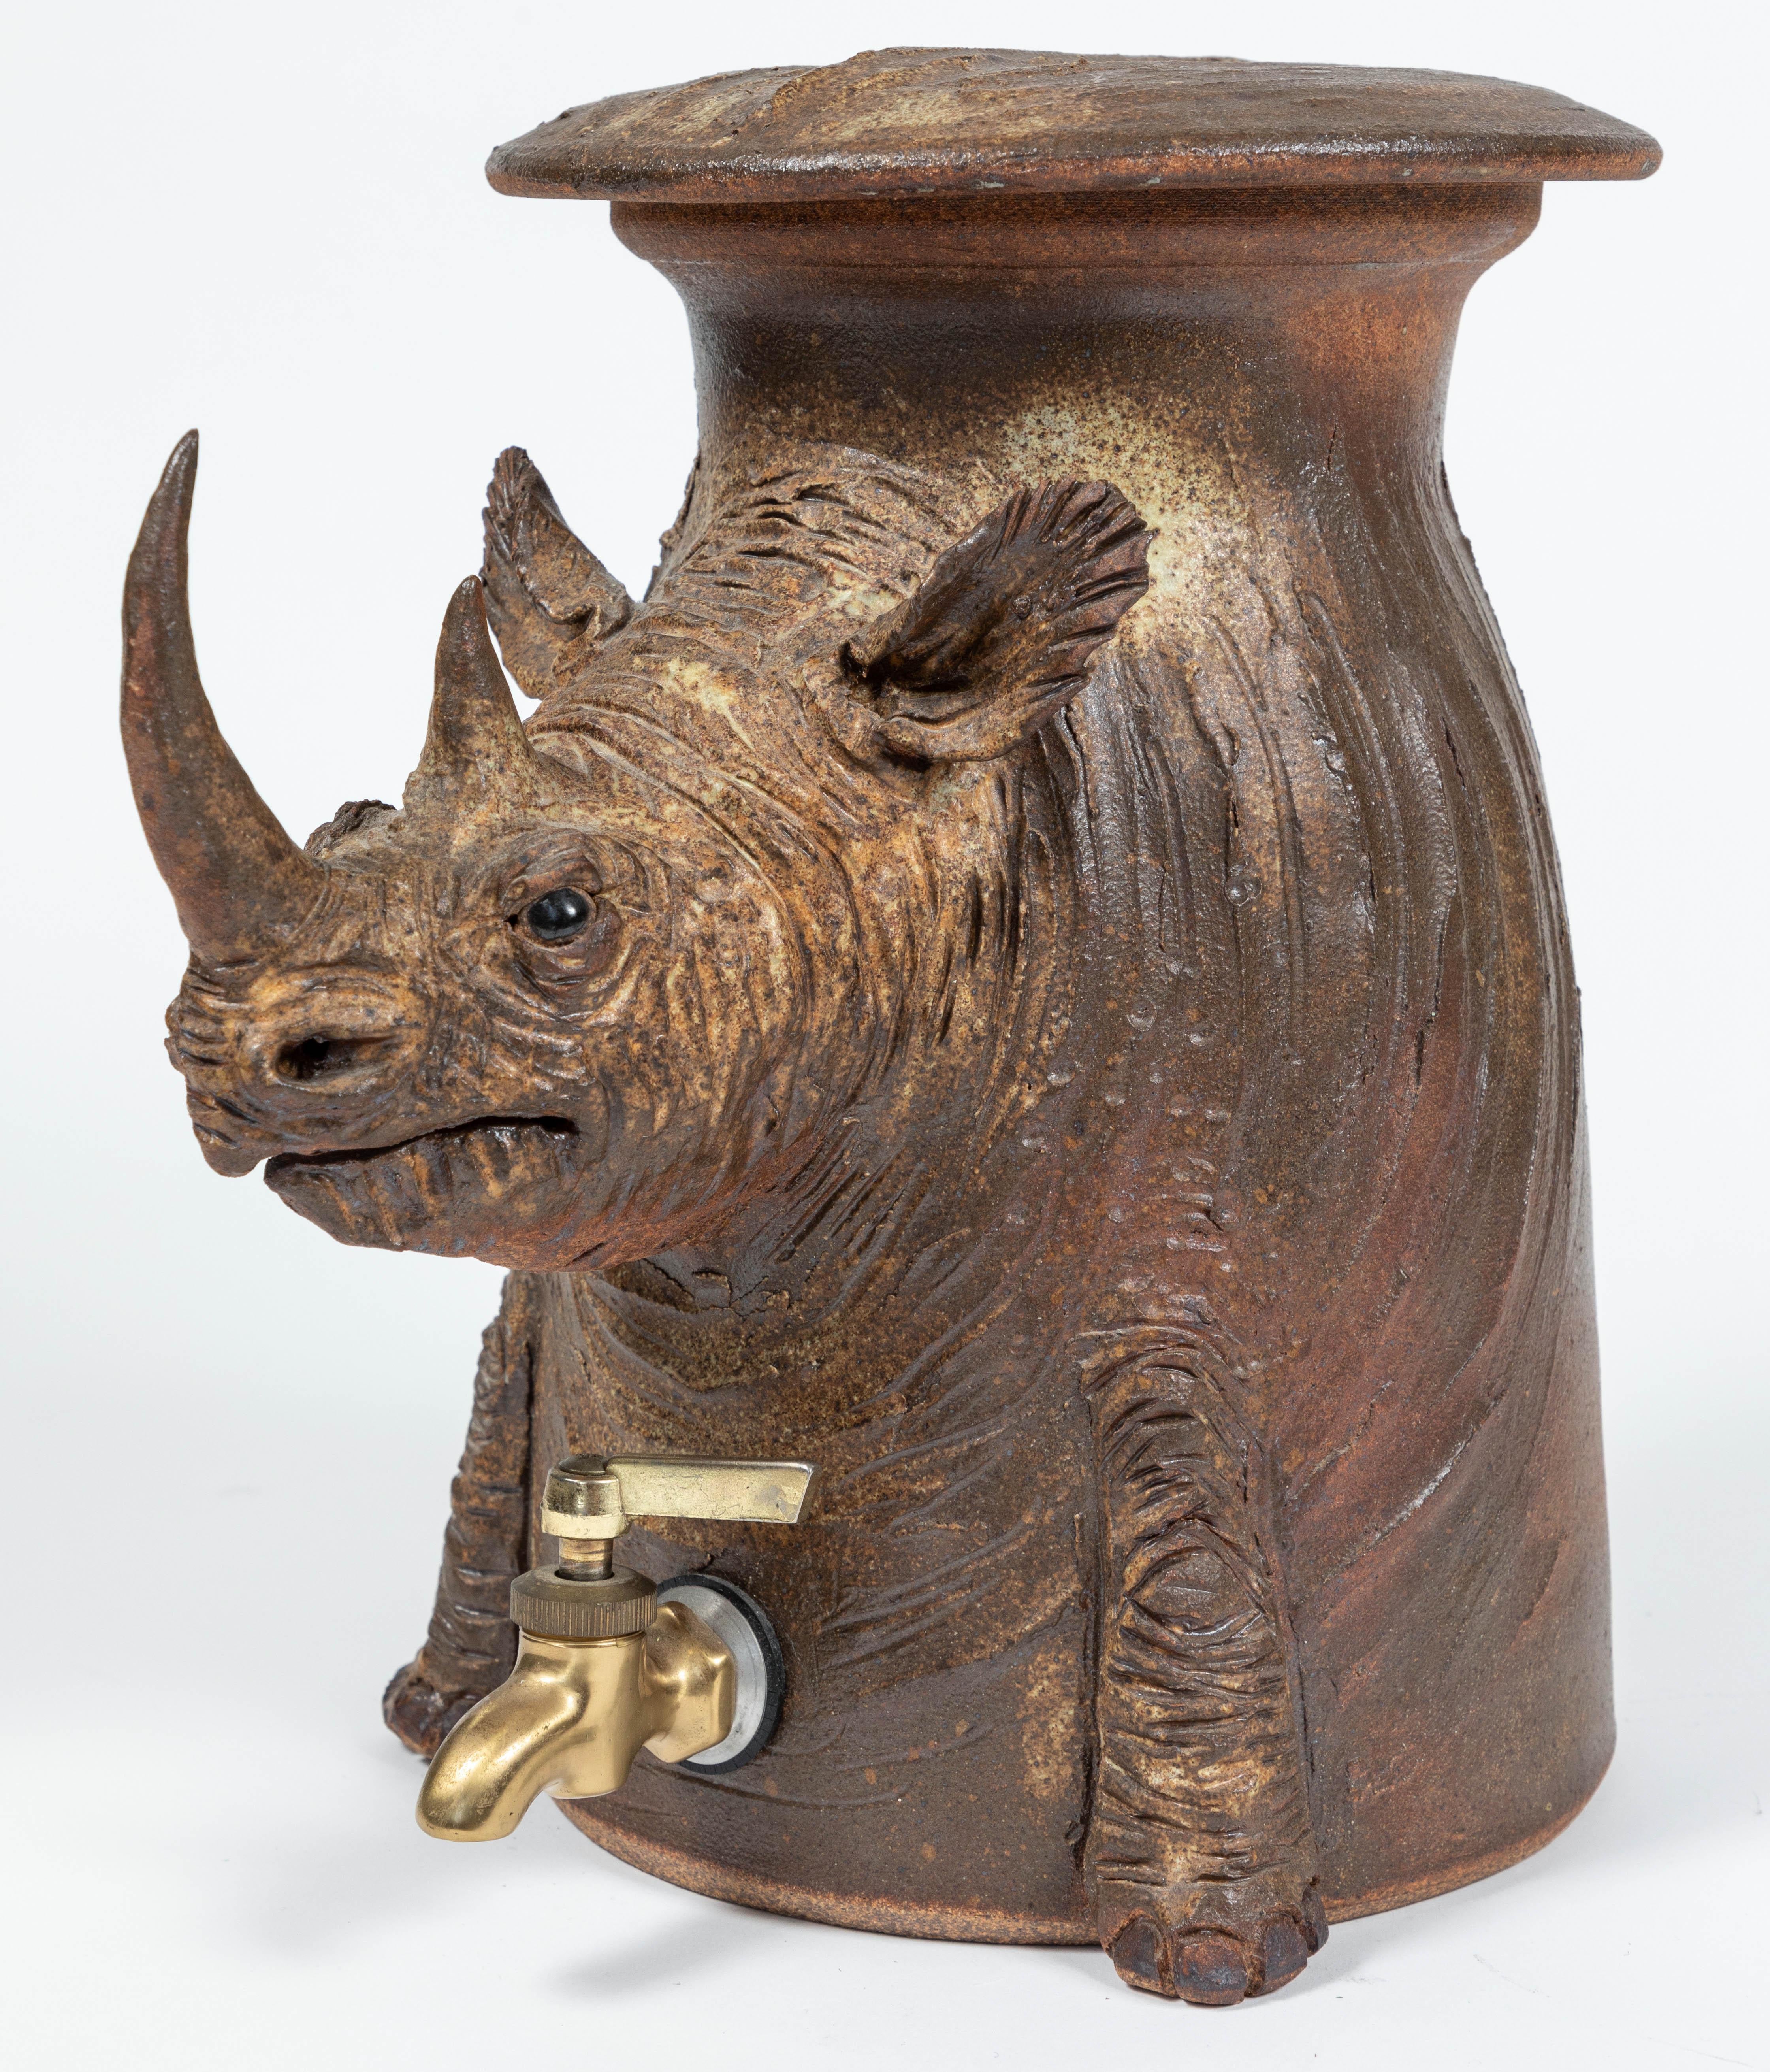 Vintage stoneware pottery drink dispenser of a rhino - signed and dated 1995.